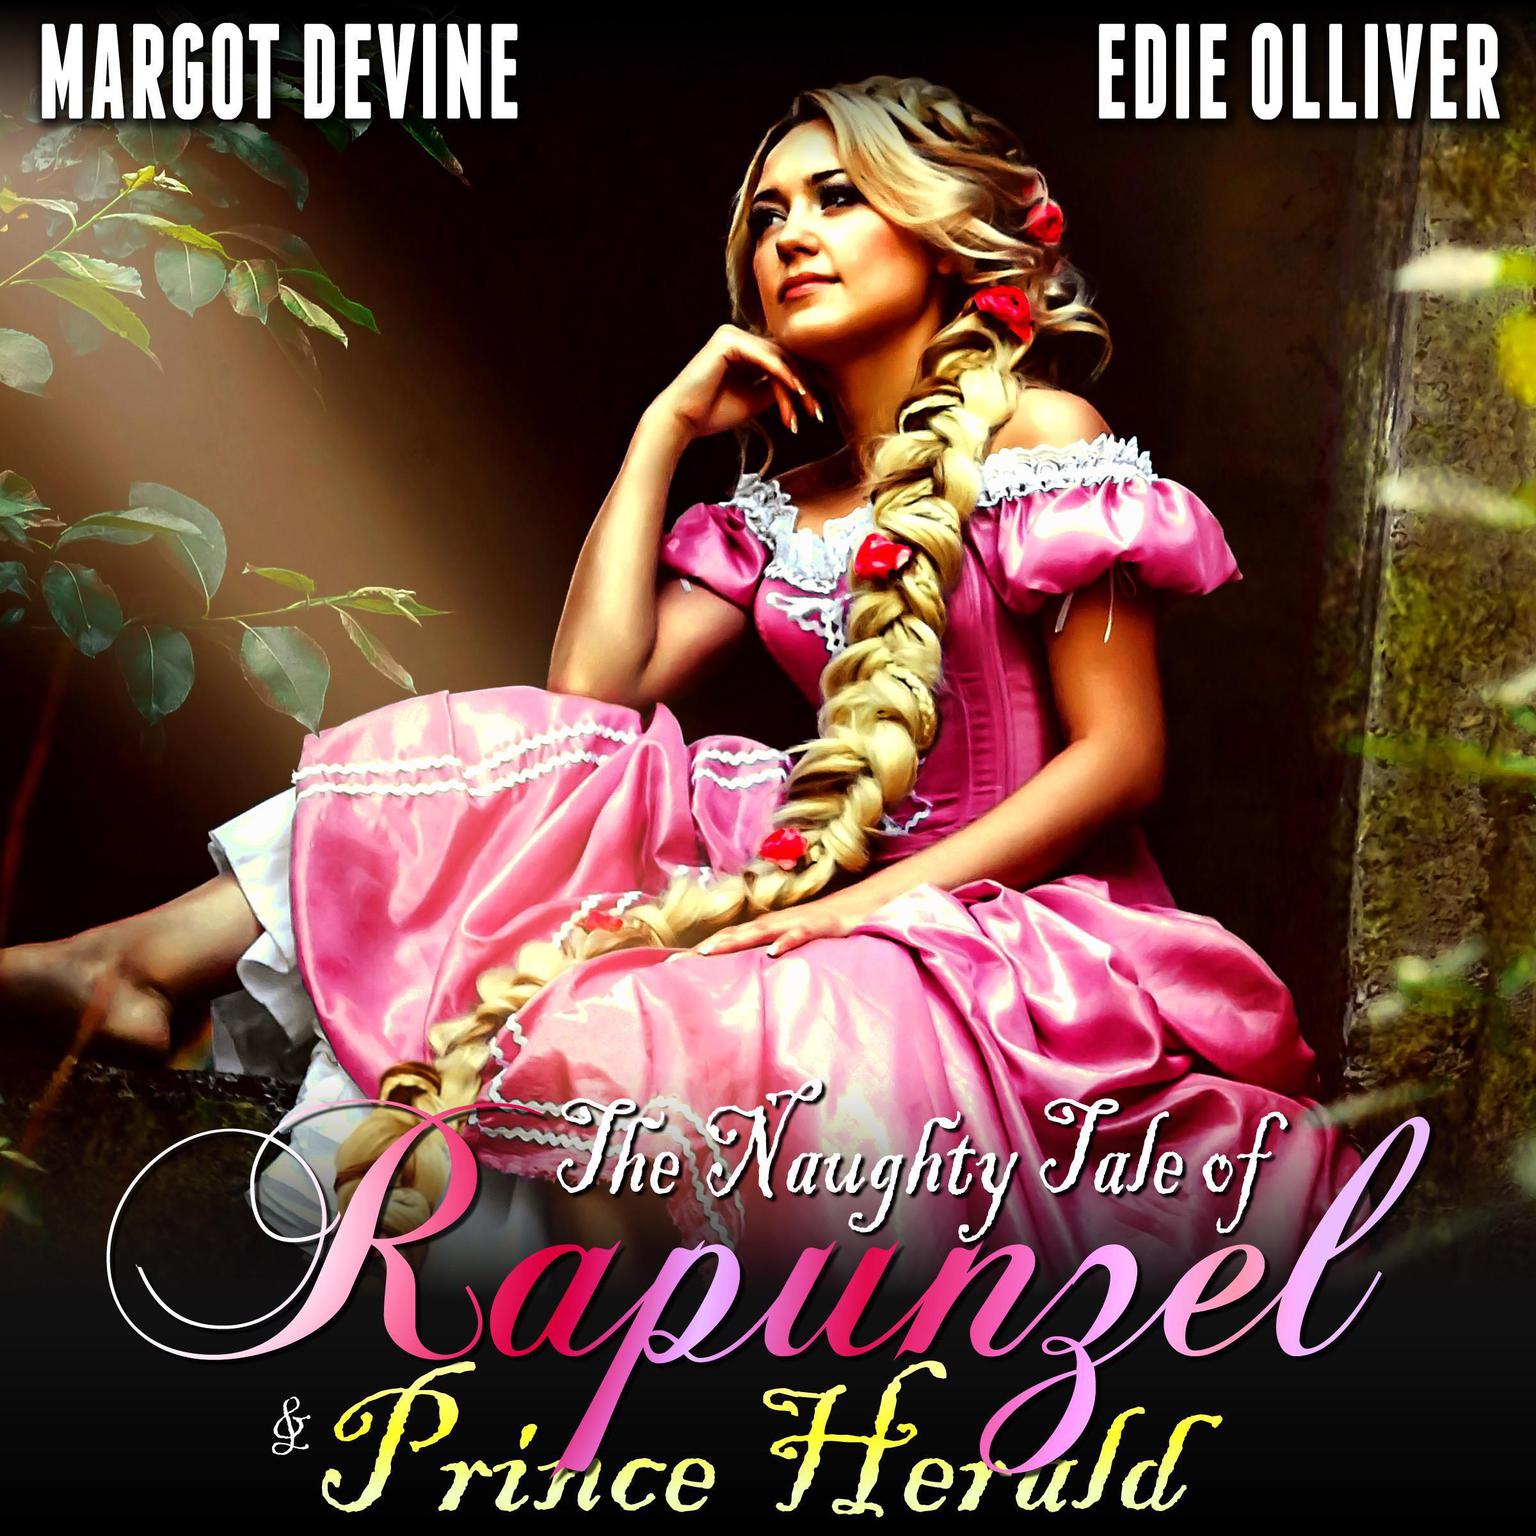 The Naughty Tale of Rapunzel & Prince Herald (FFM Adult Fairytale Threesome) Audiobook, by Margot Devine